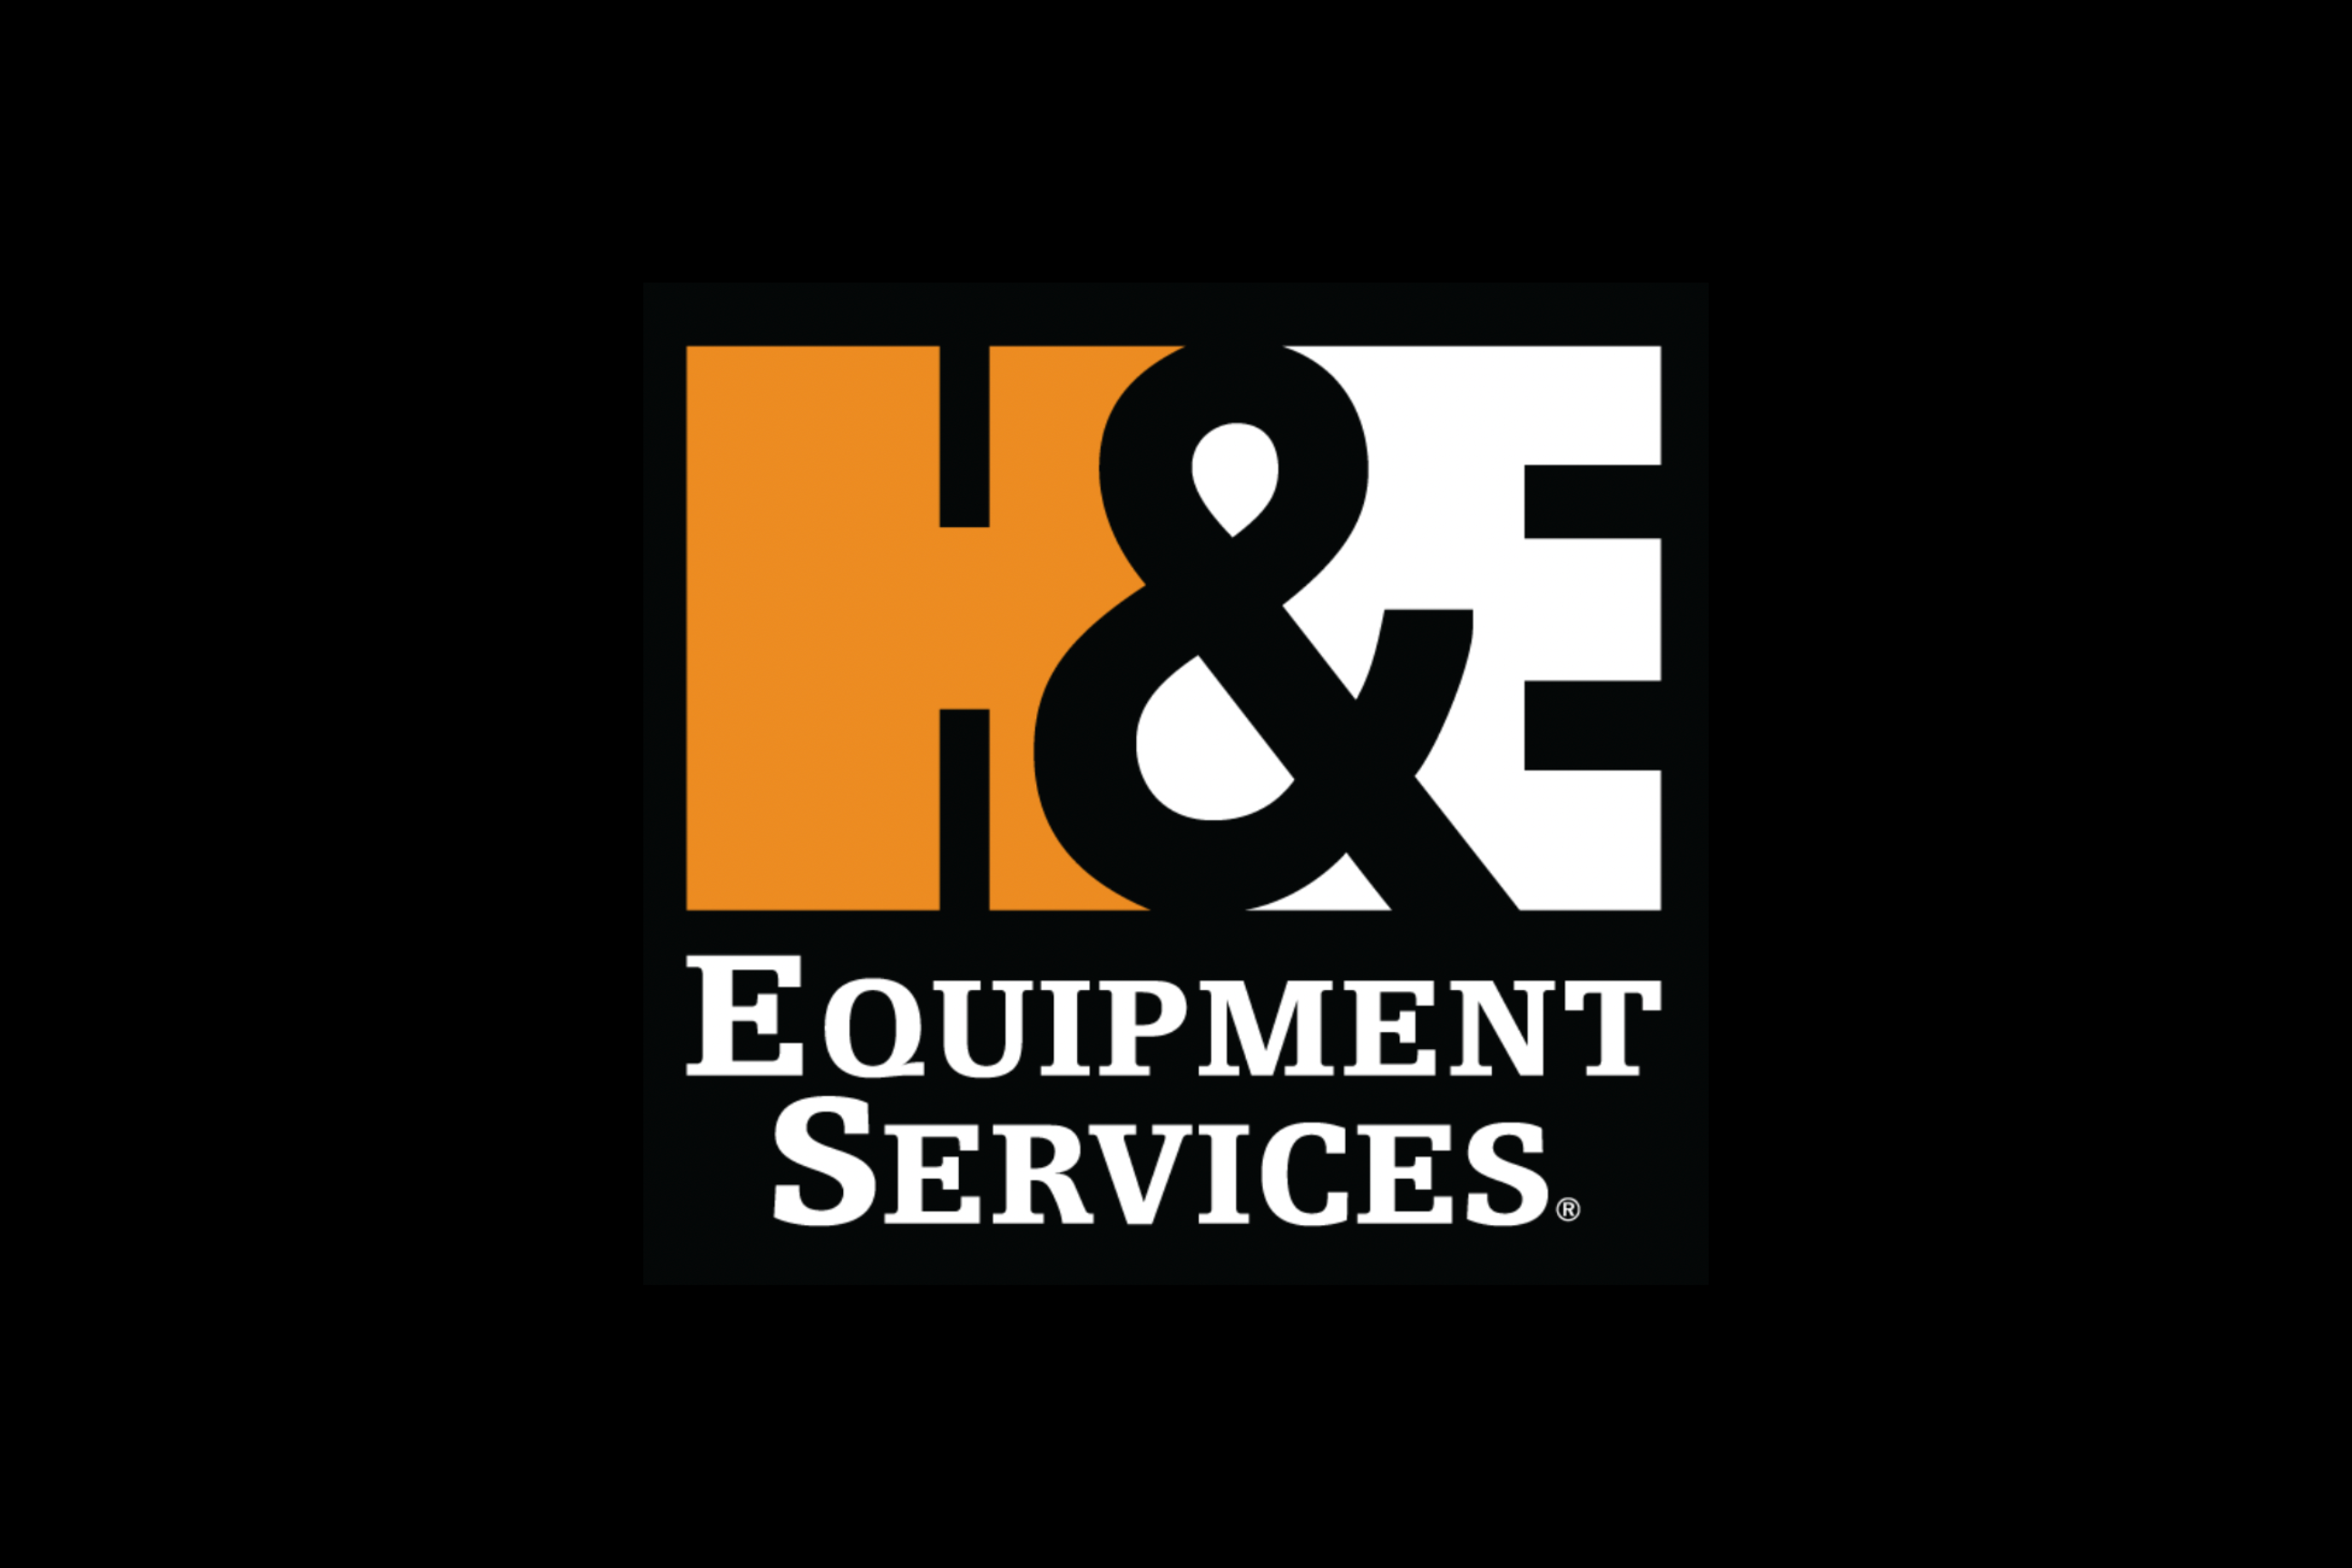 H&E Equipment Services Expands in California, Acquires Rental Assets of Giffin Equipment